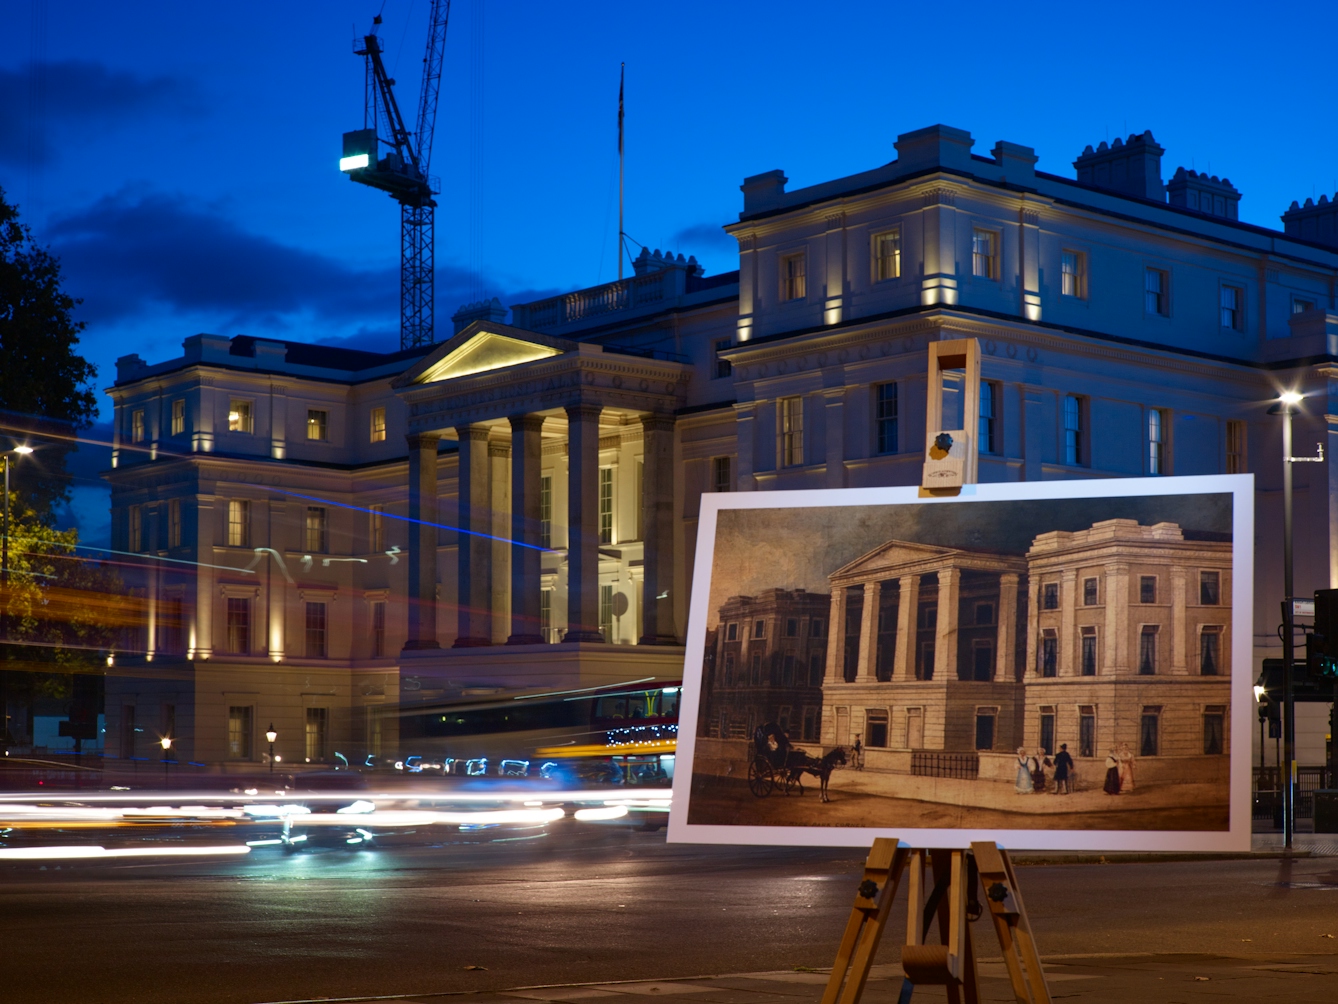 Photograph of the former St George’s Hospital with an historical image of the hospital displayed in front of it on a wooden artist's easel.